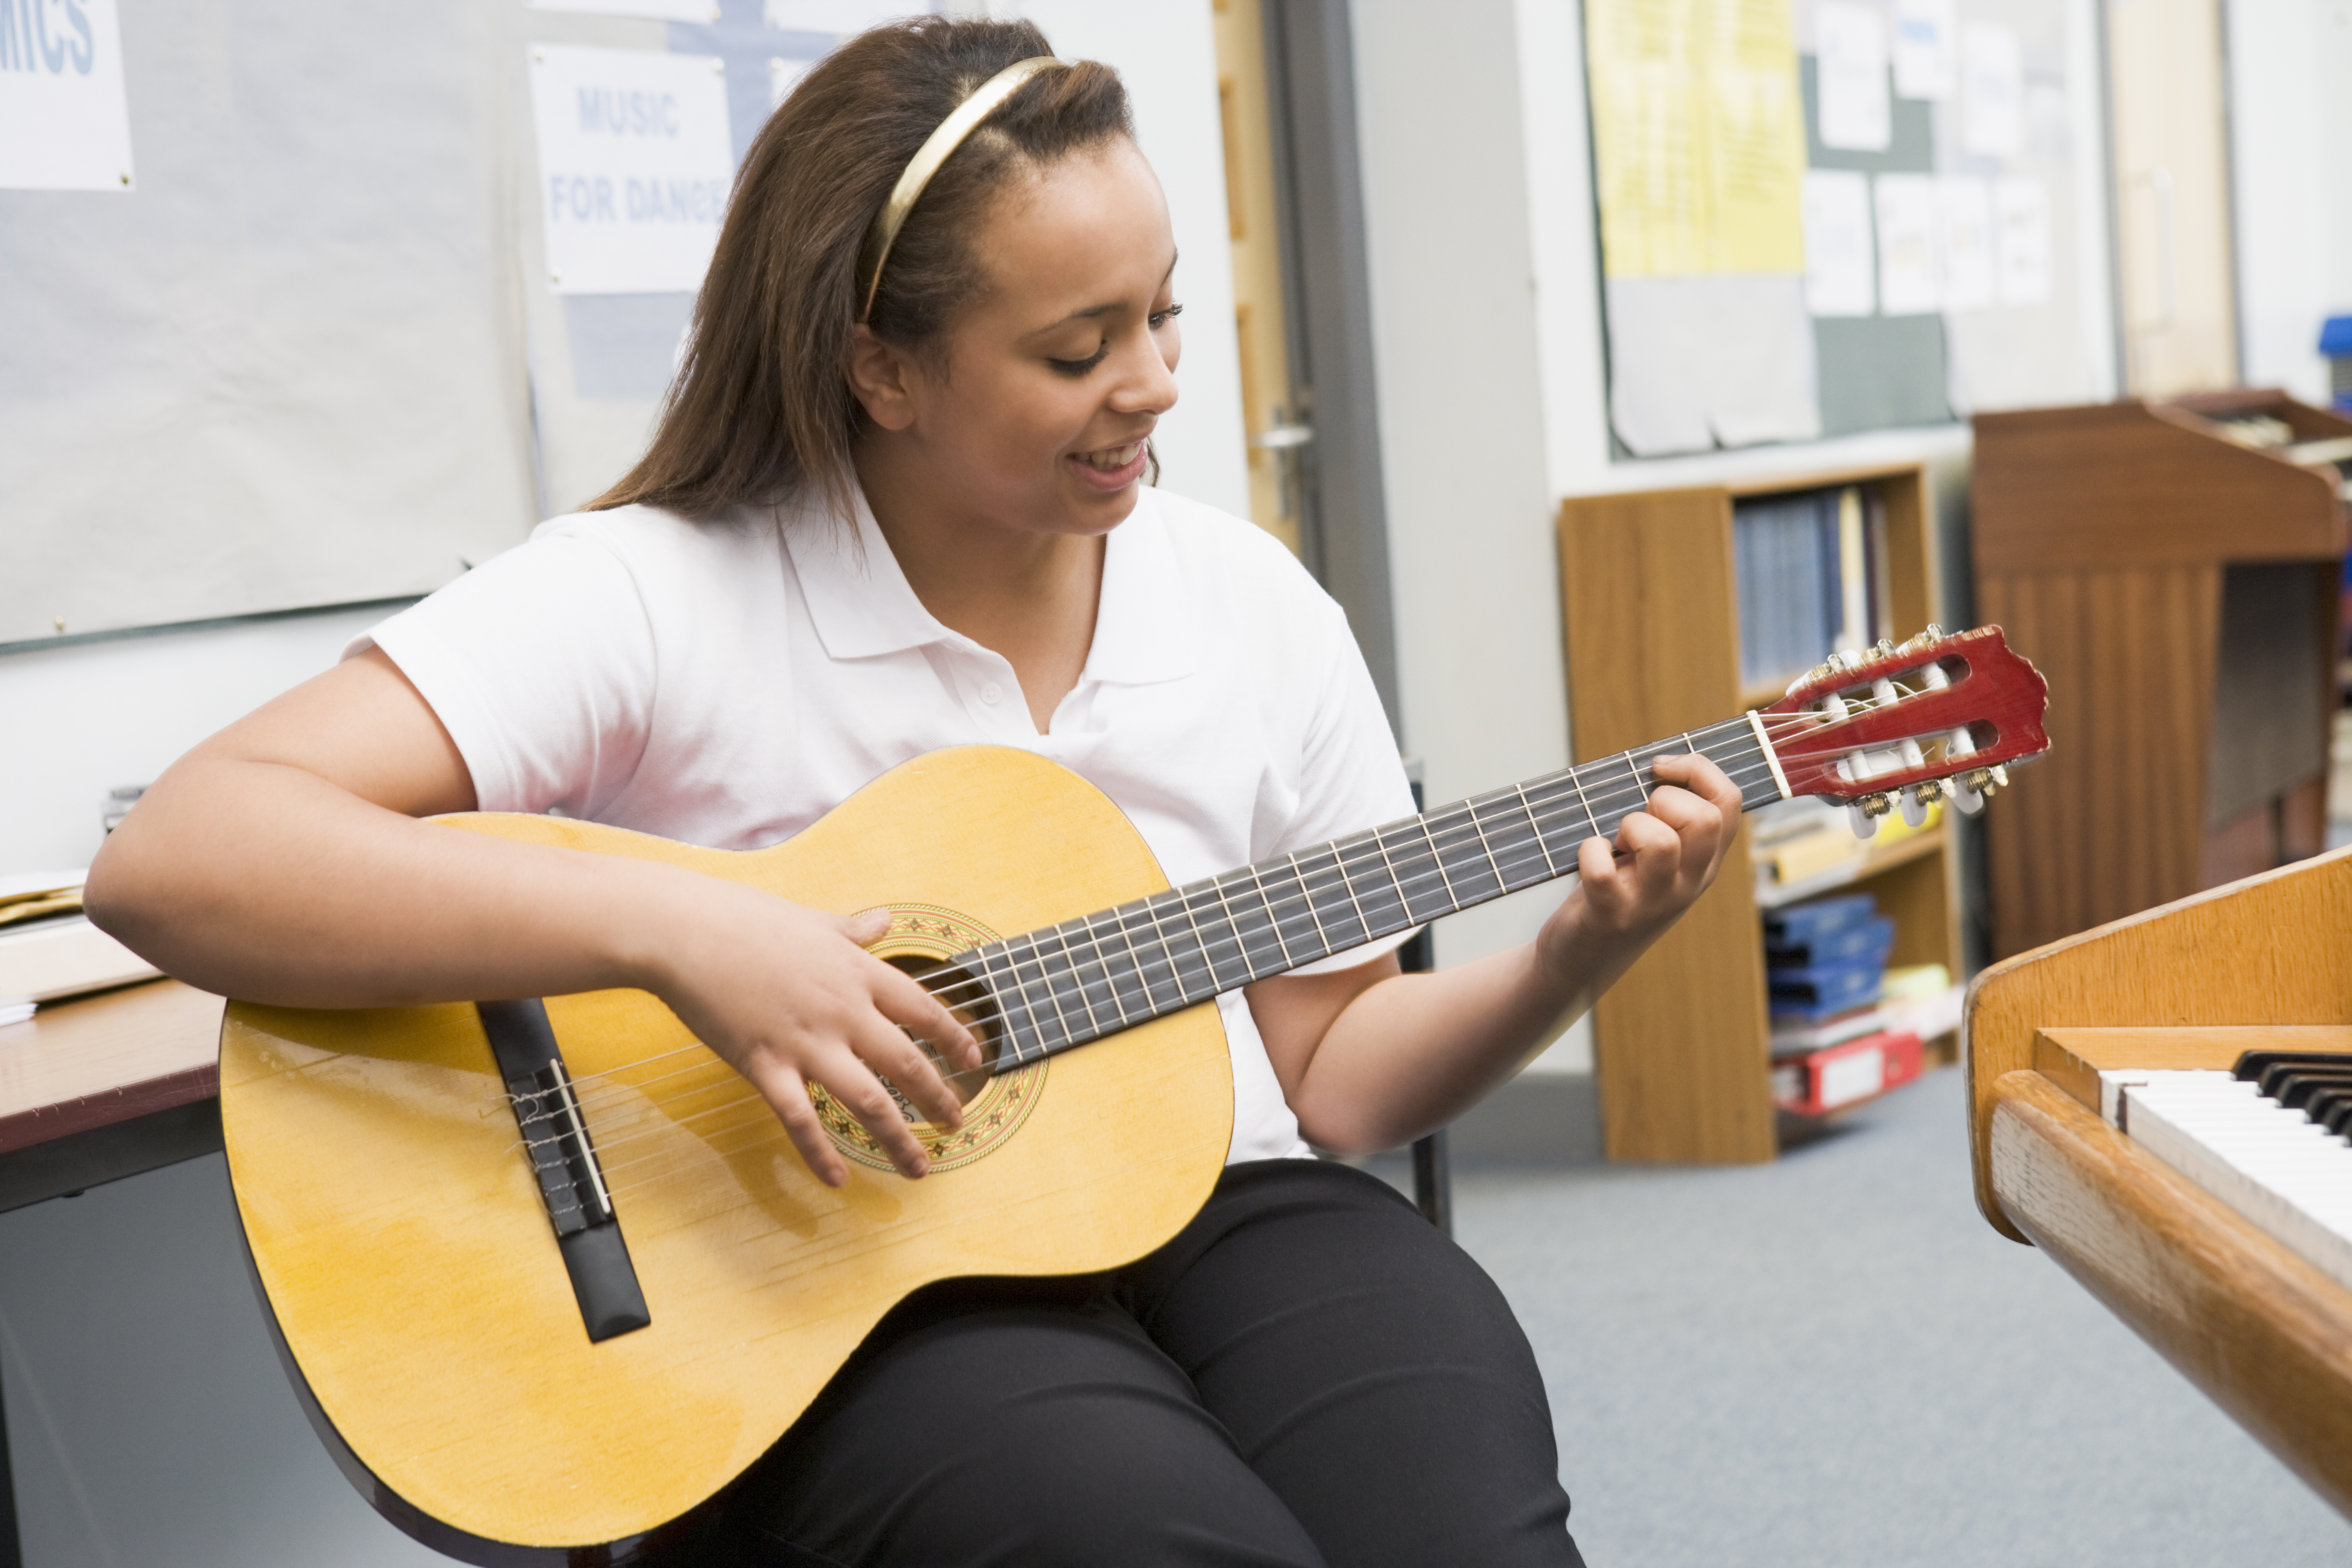 In the News: ‘Guitar heroes’ answer a teacher’s call